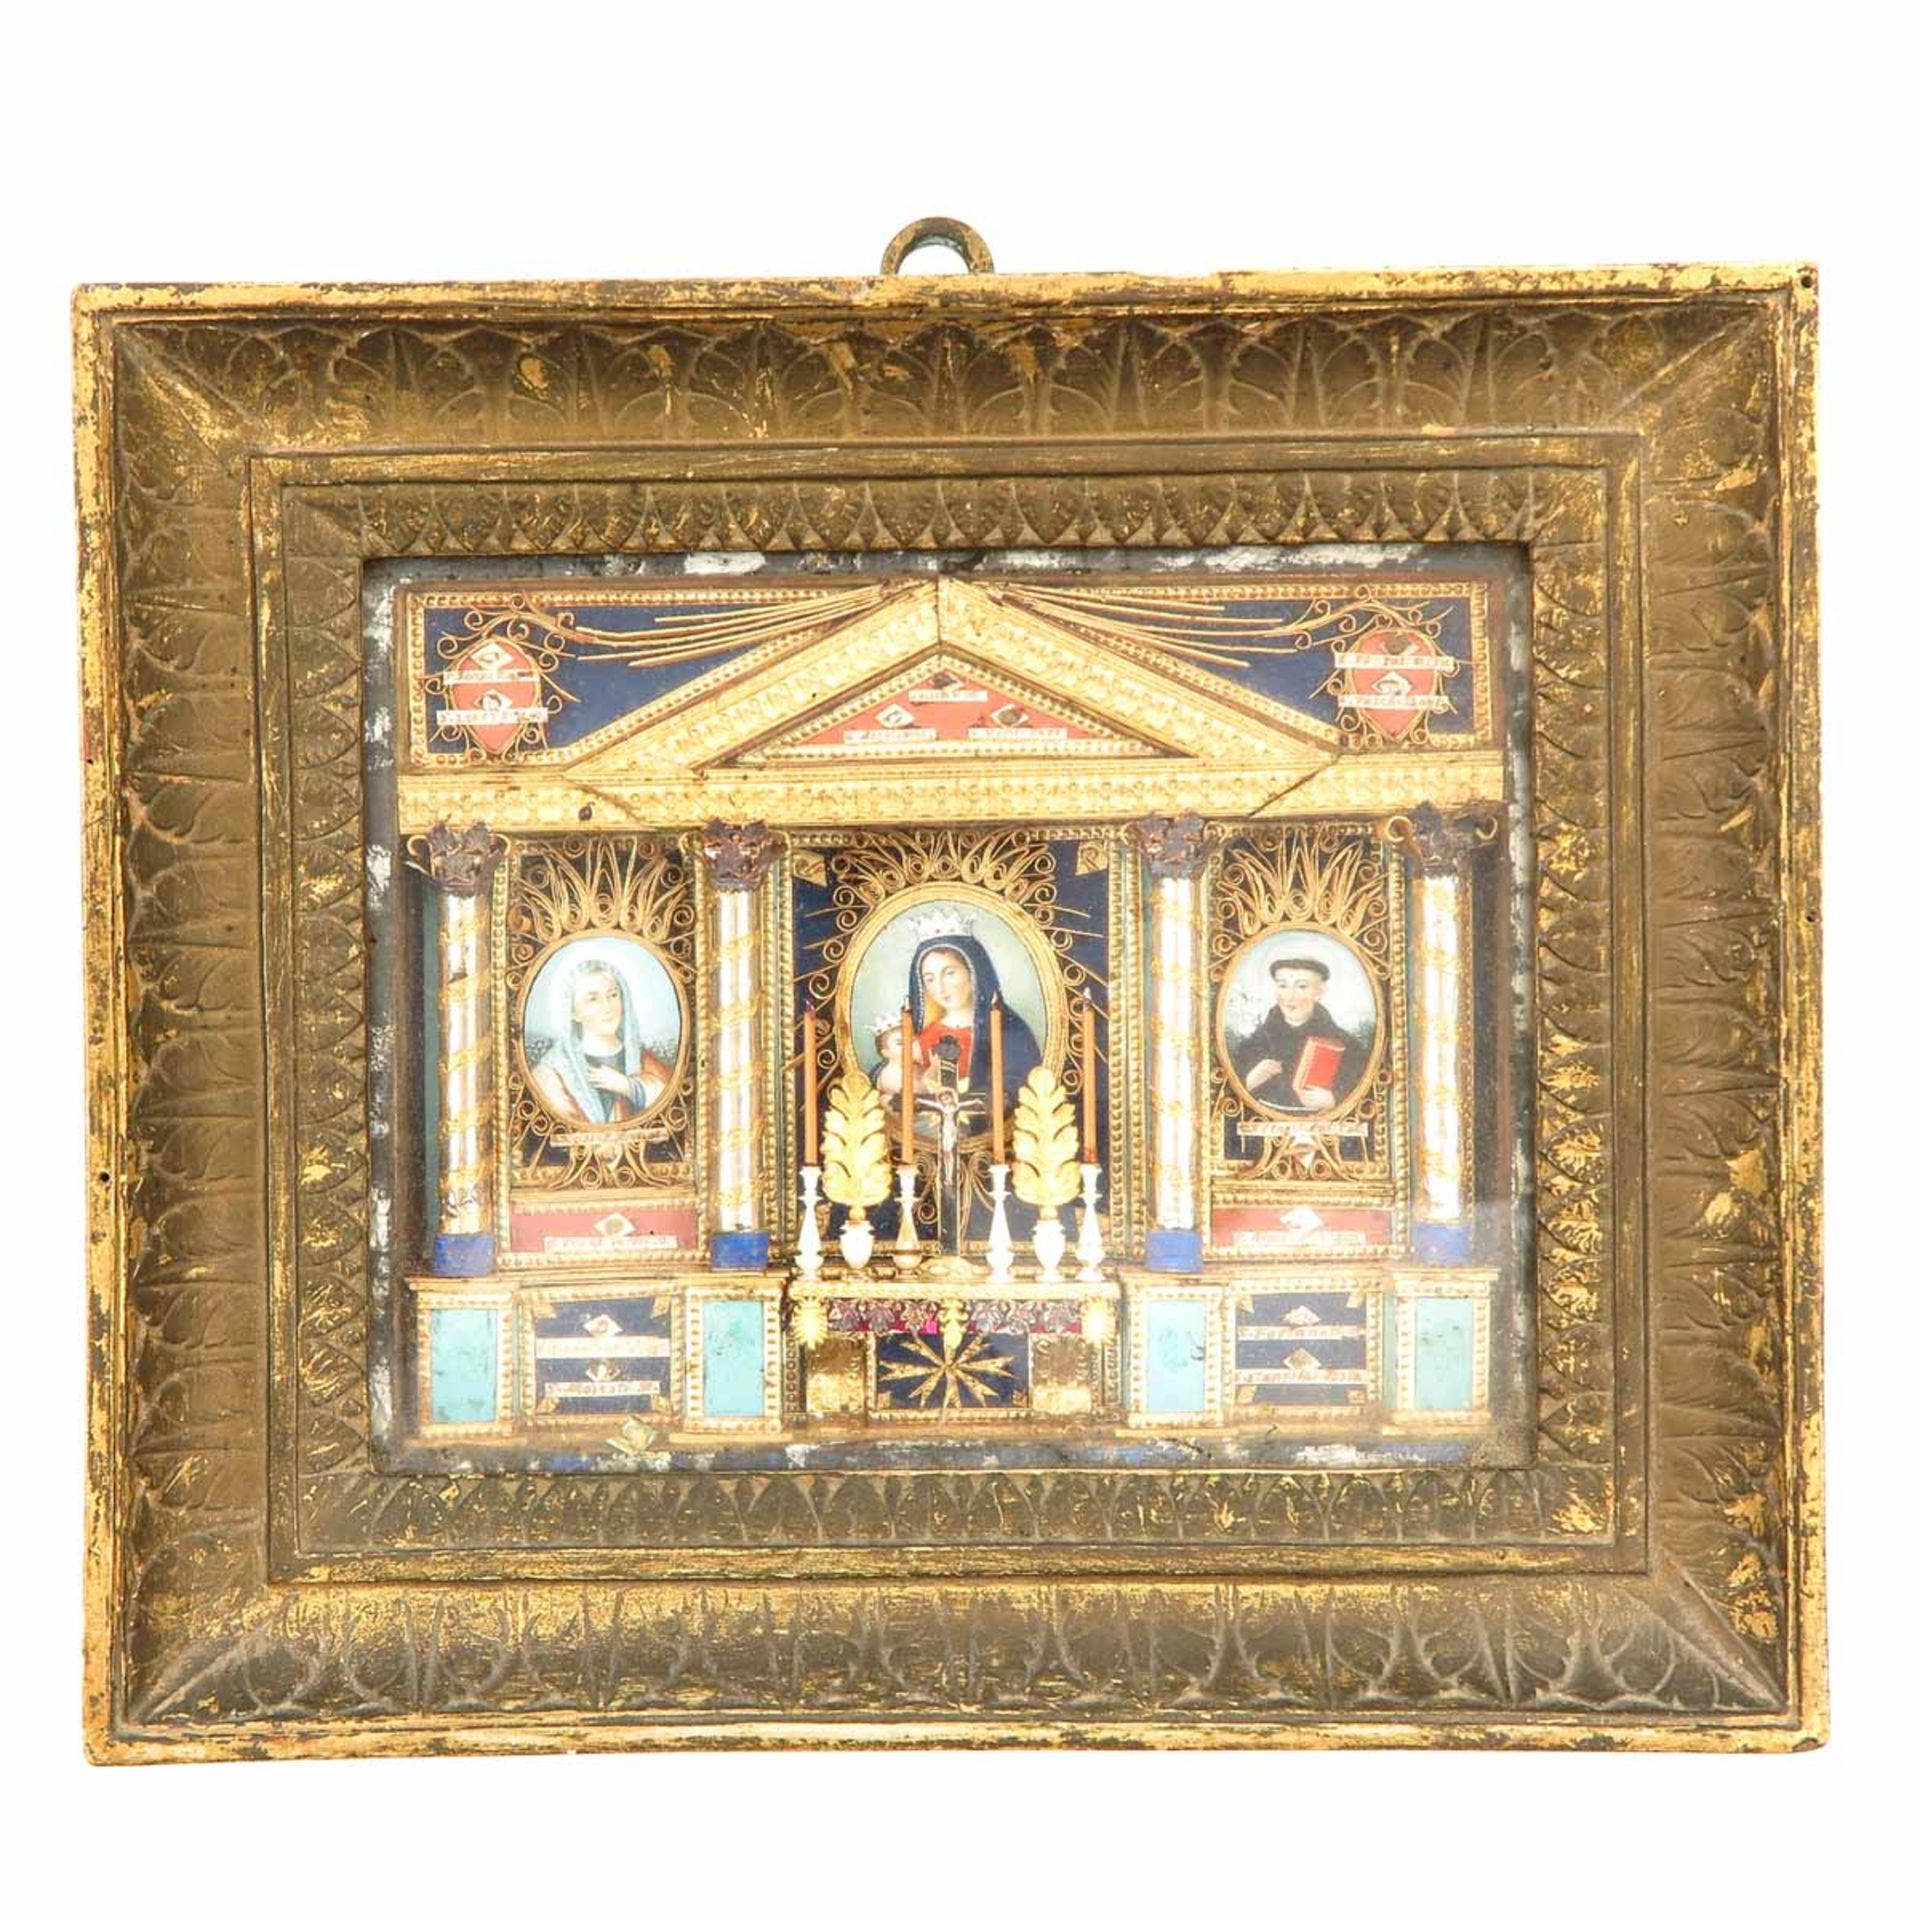 A Relic Holder Including 15 Relics